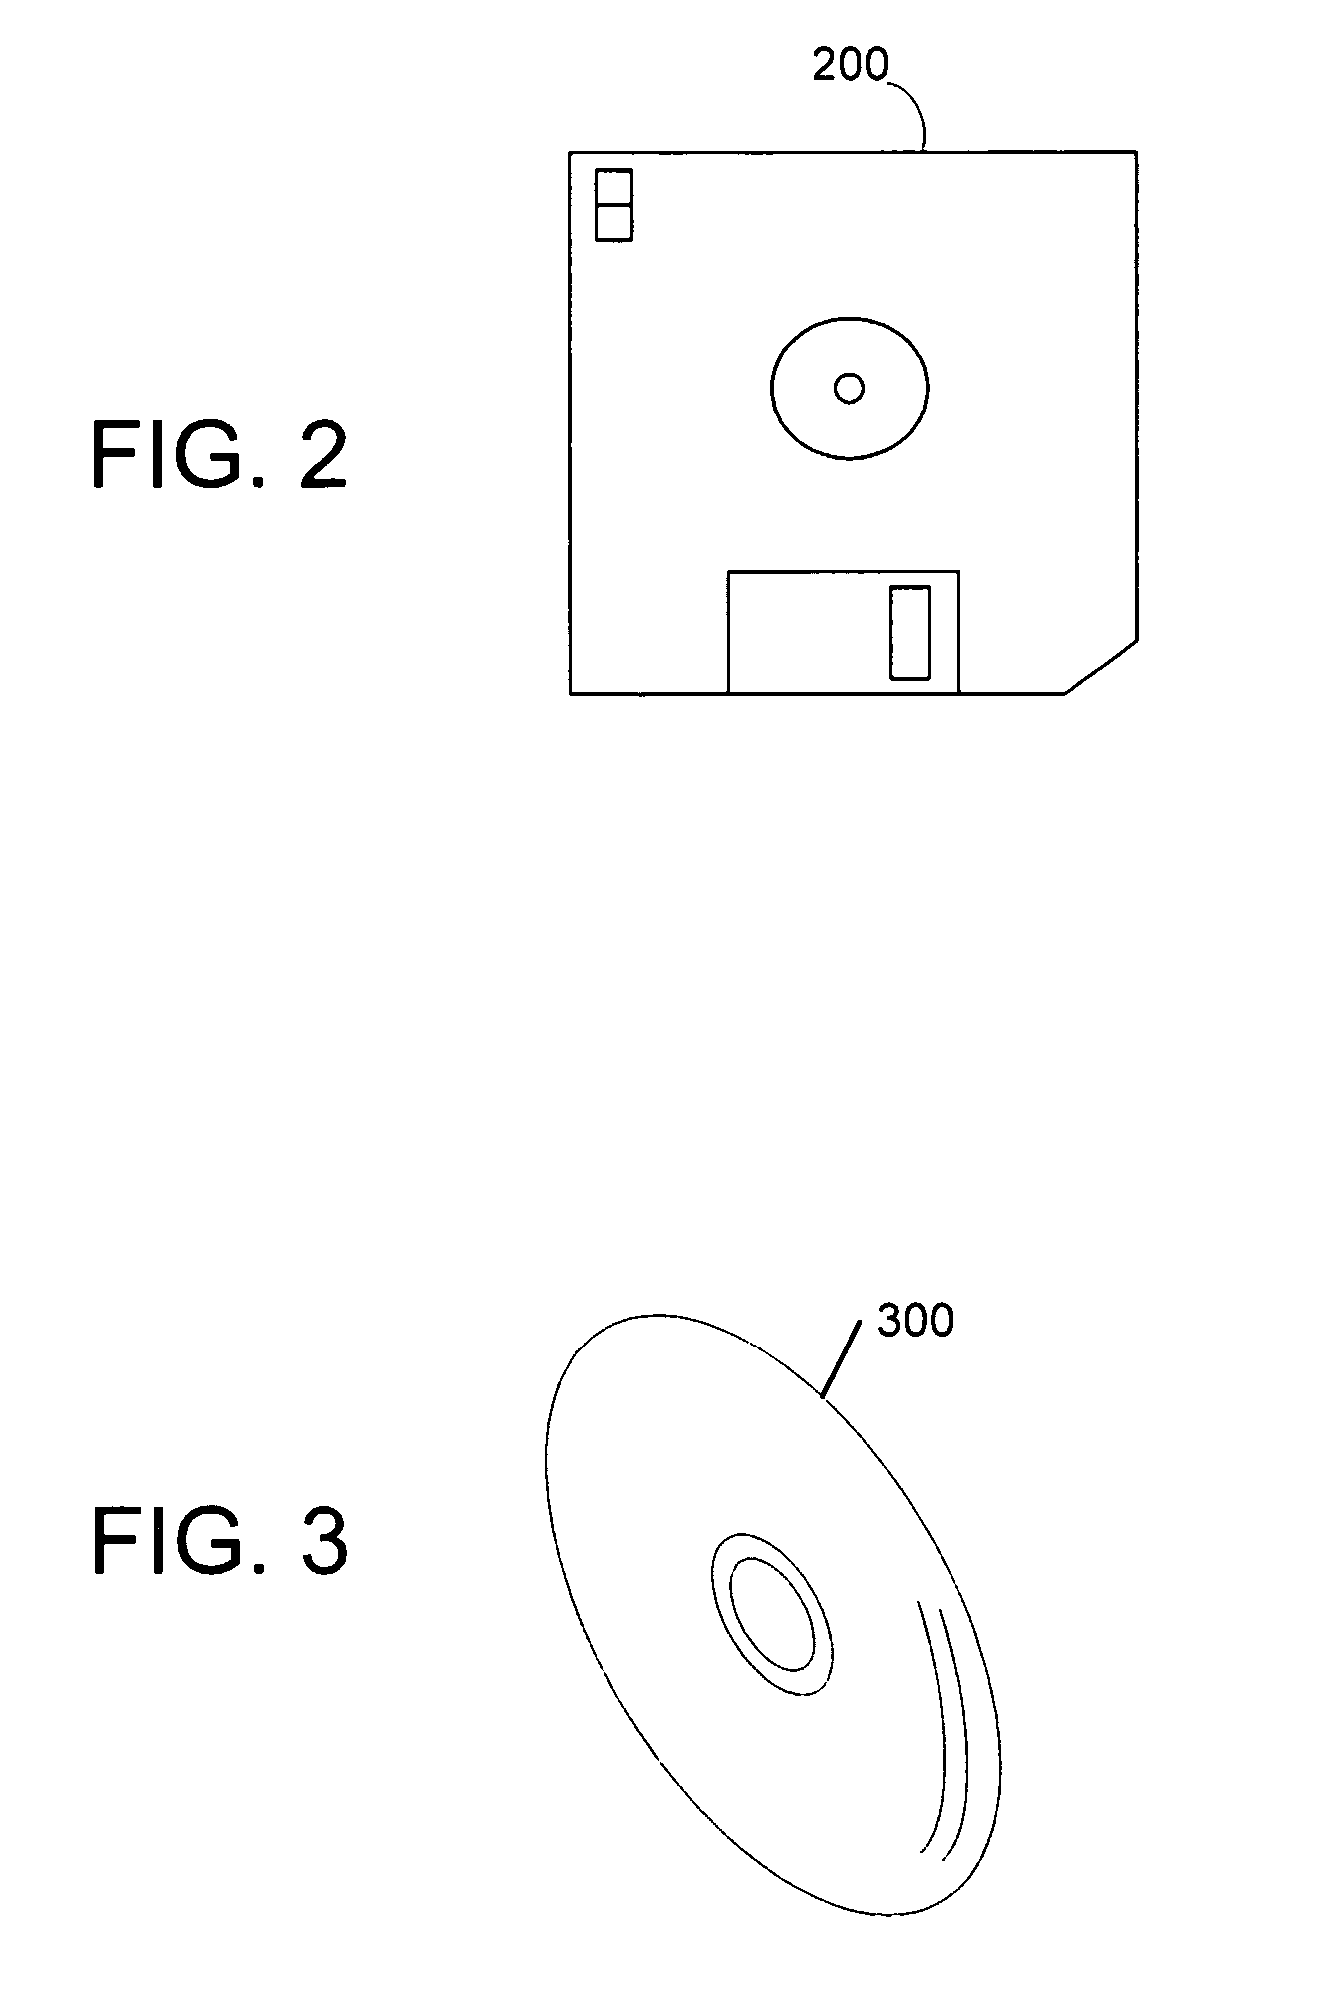 Method and apparatus utilizing voice input to resolve ambiguous manually entered text input